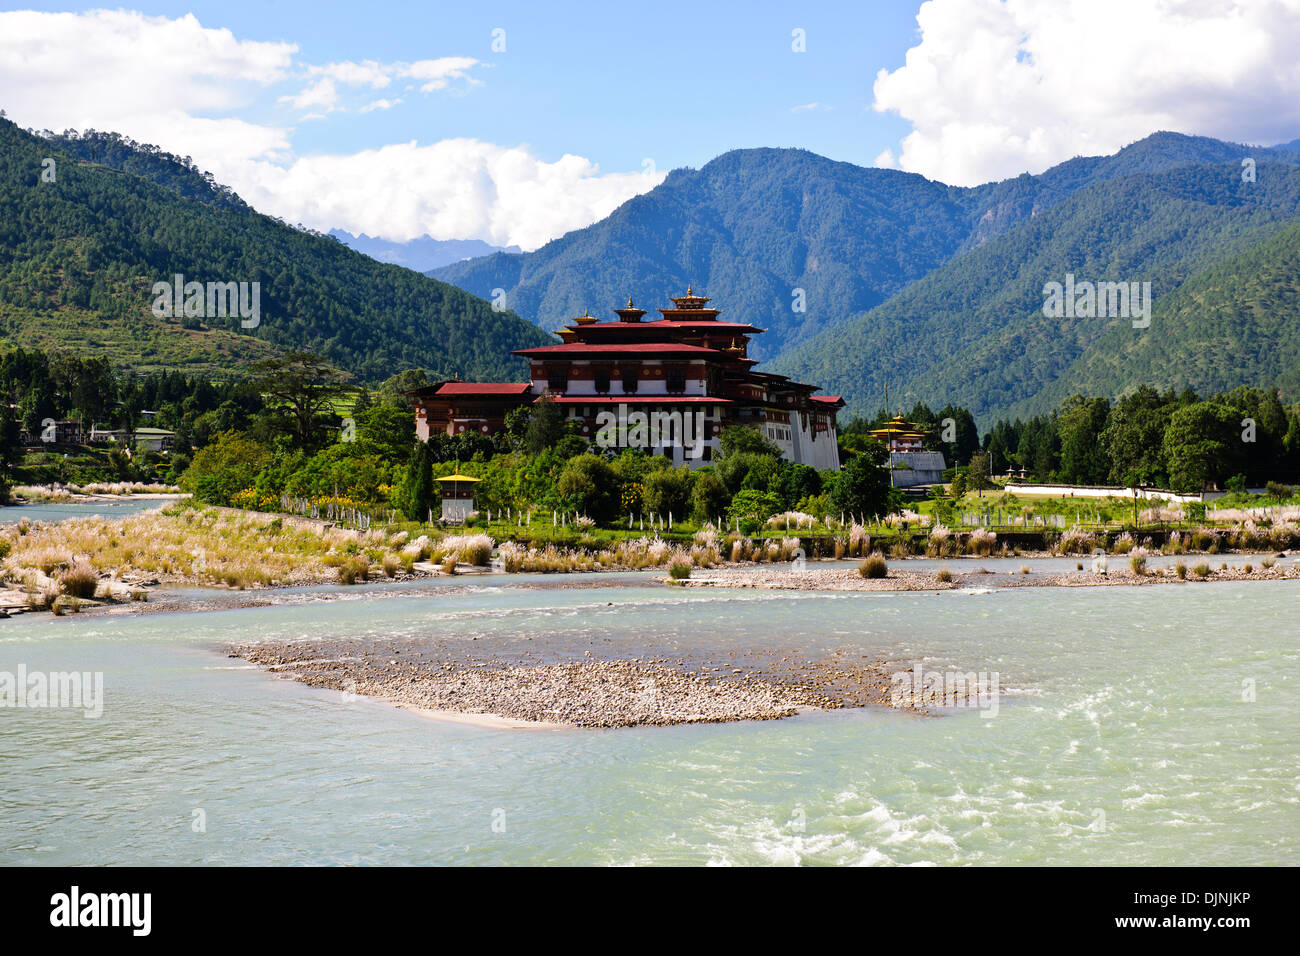 Punakha Dzong,The head of the clergy of Bhutan with his entourage of Buddhist monks spend the winter in this Dzong,Surroundings Stock Photo